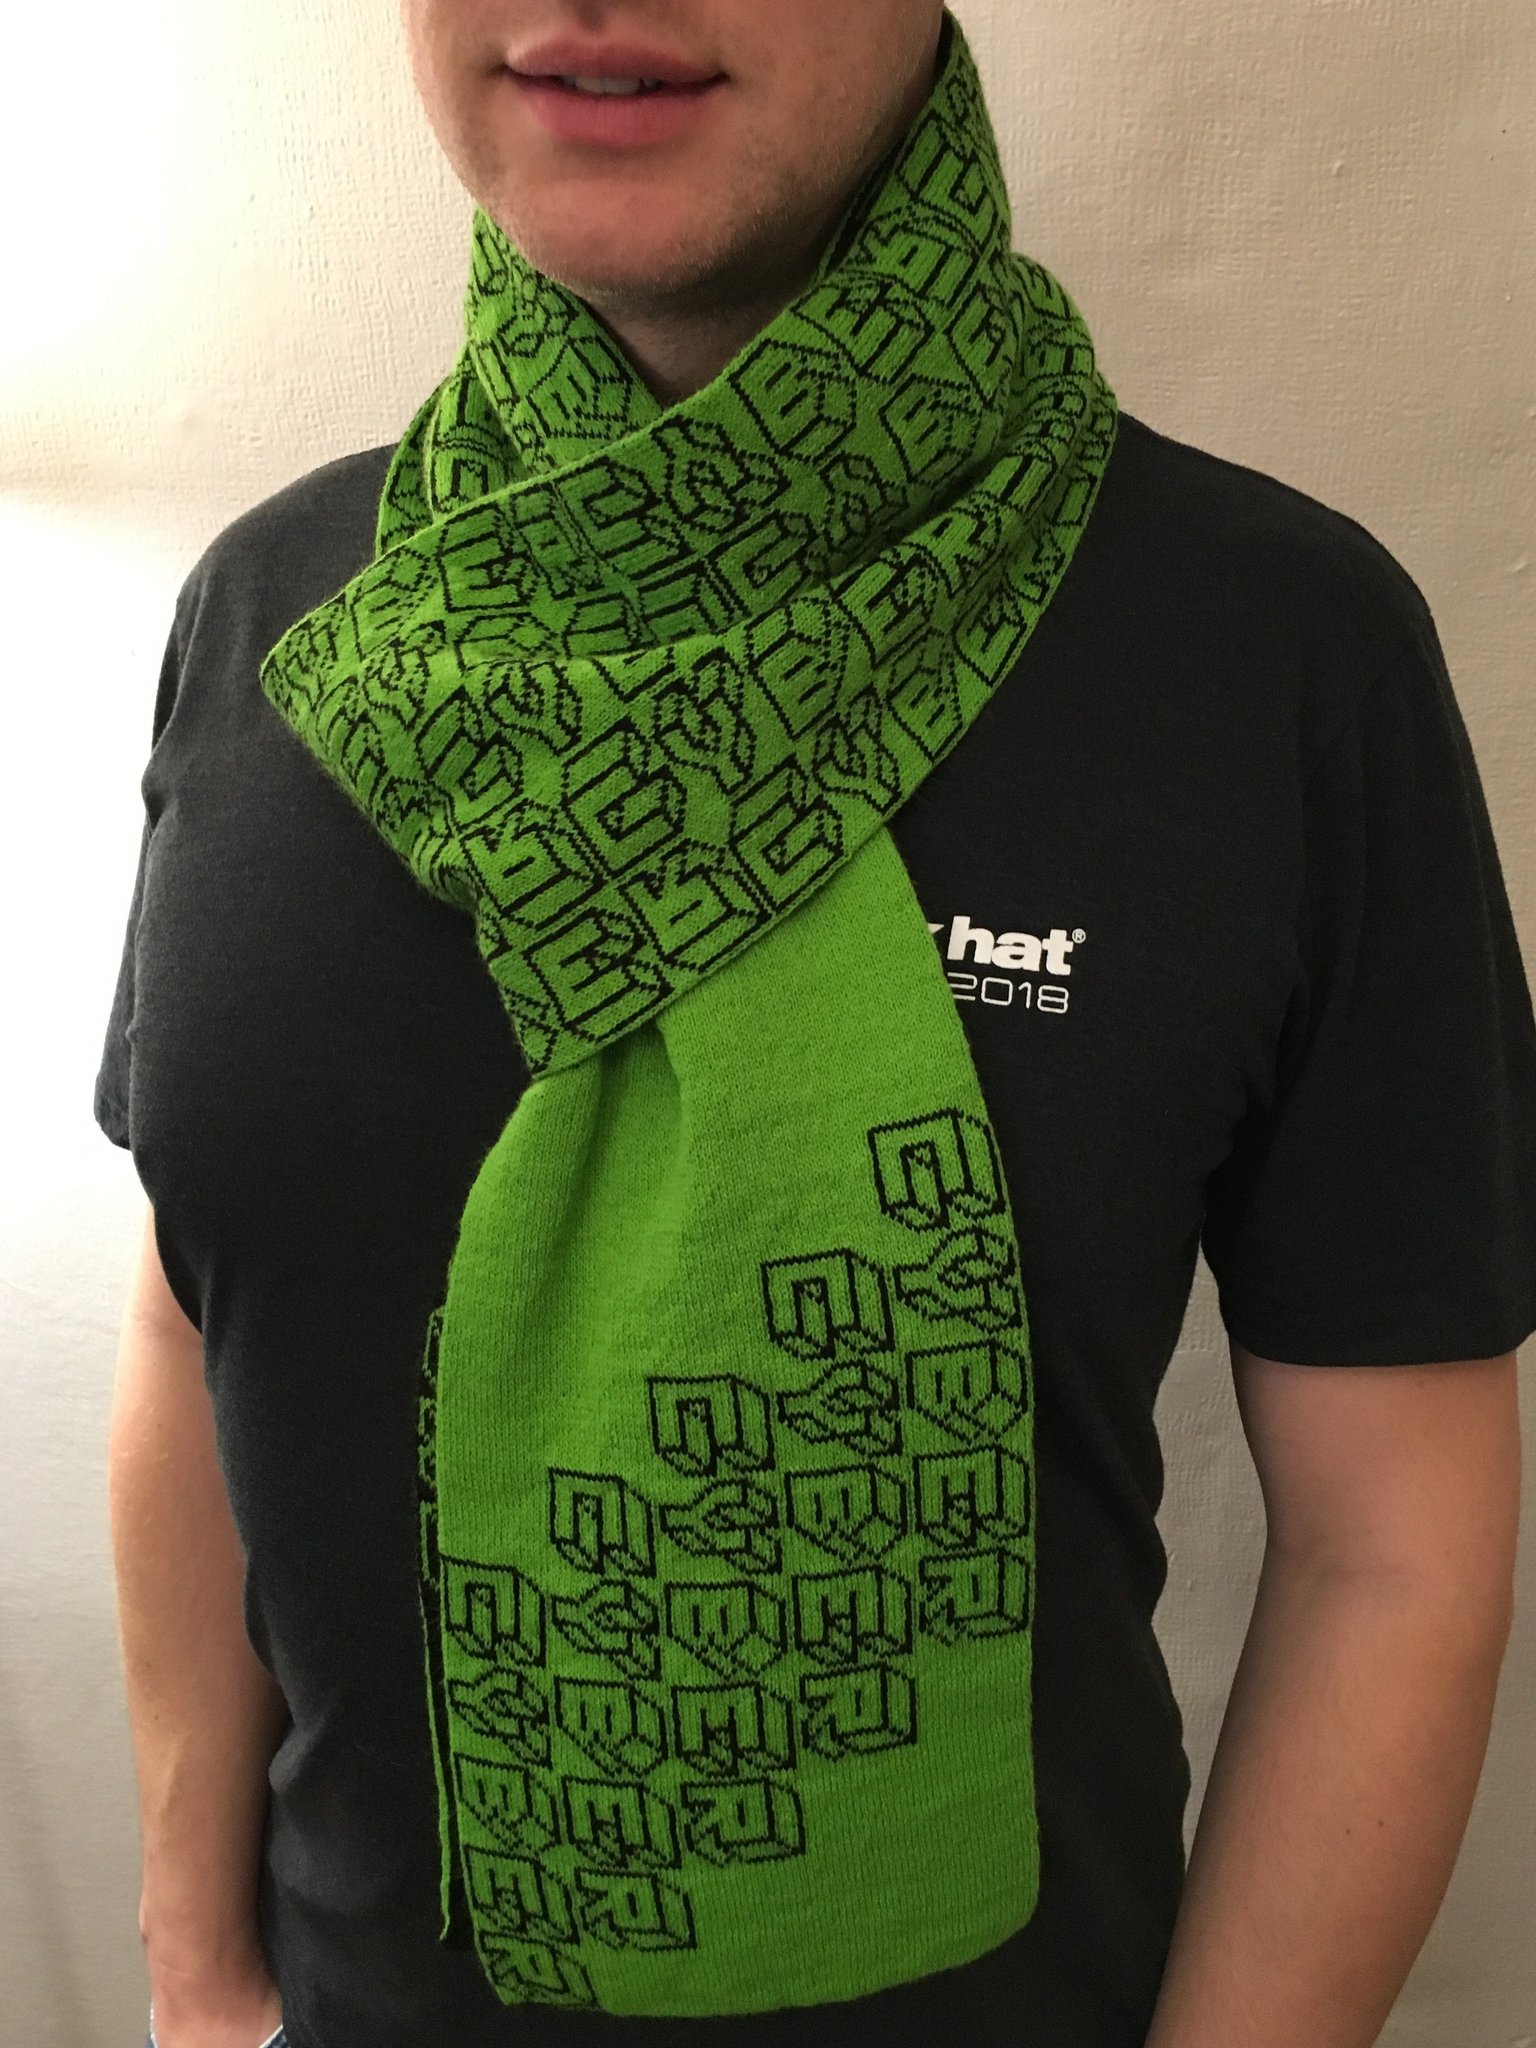 Machine Knit Cyber Scarf Ships With Its Source Code Boing